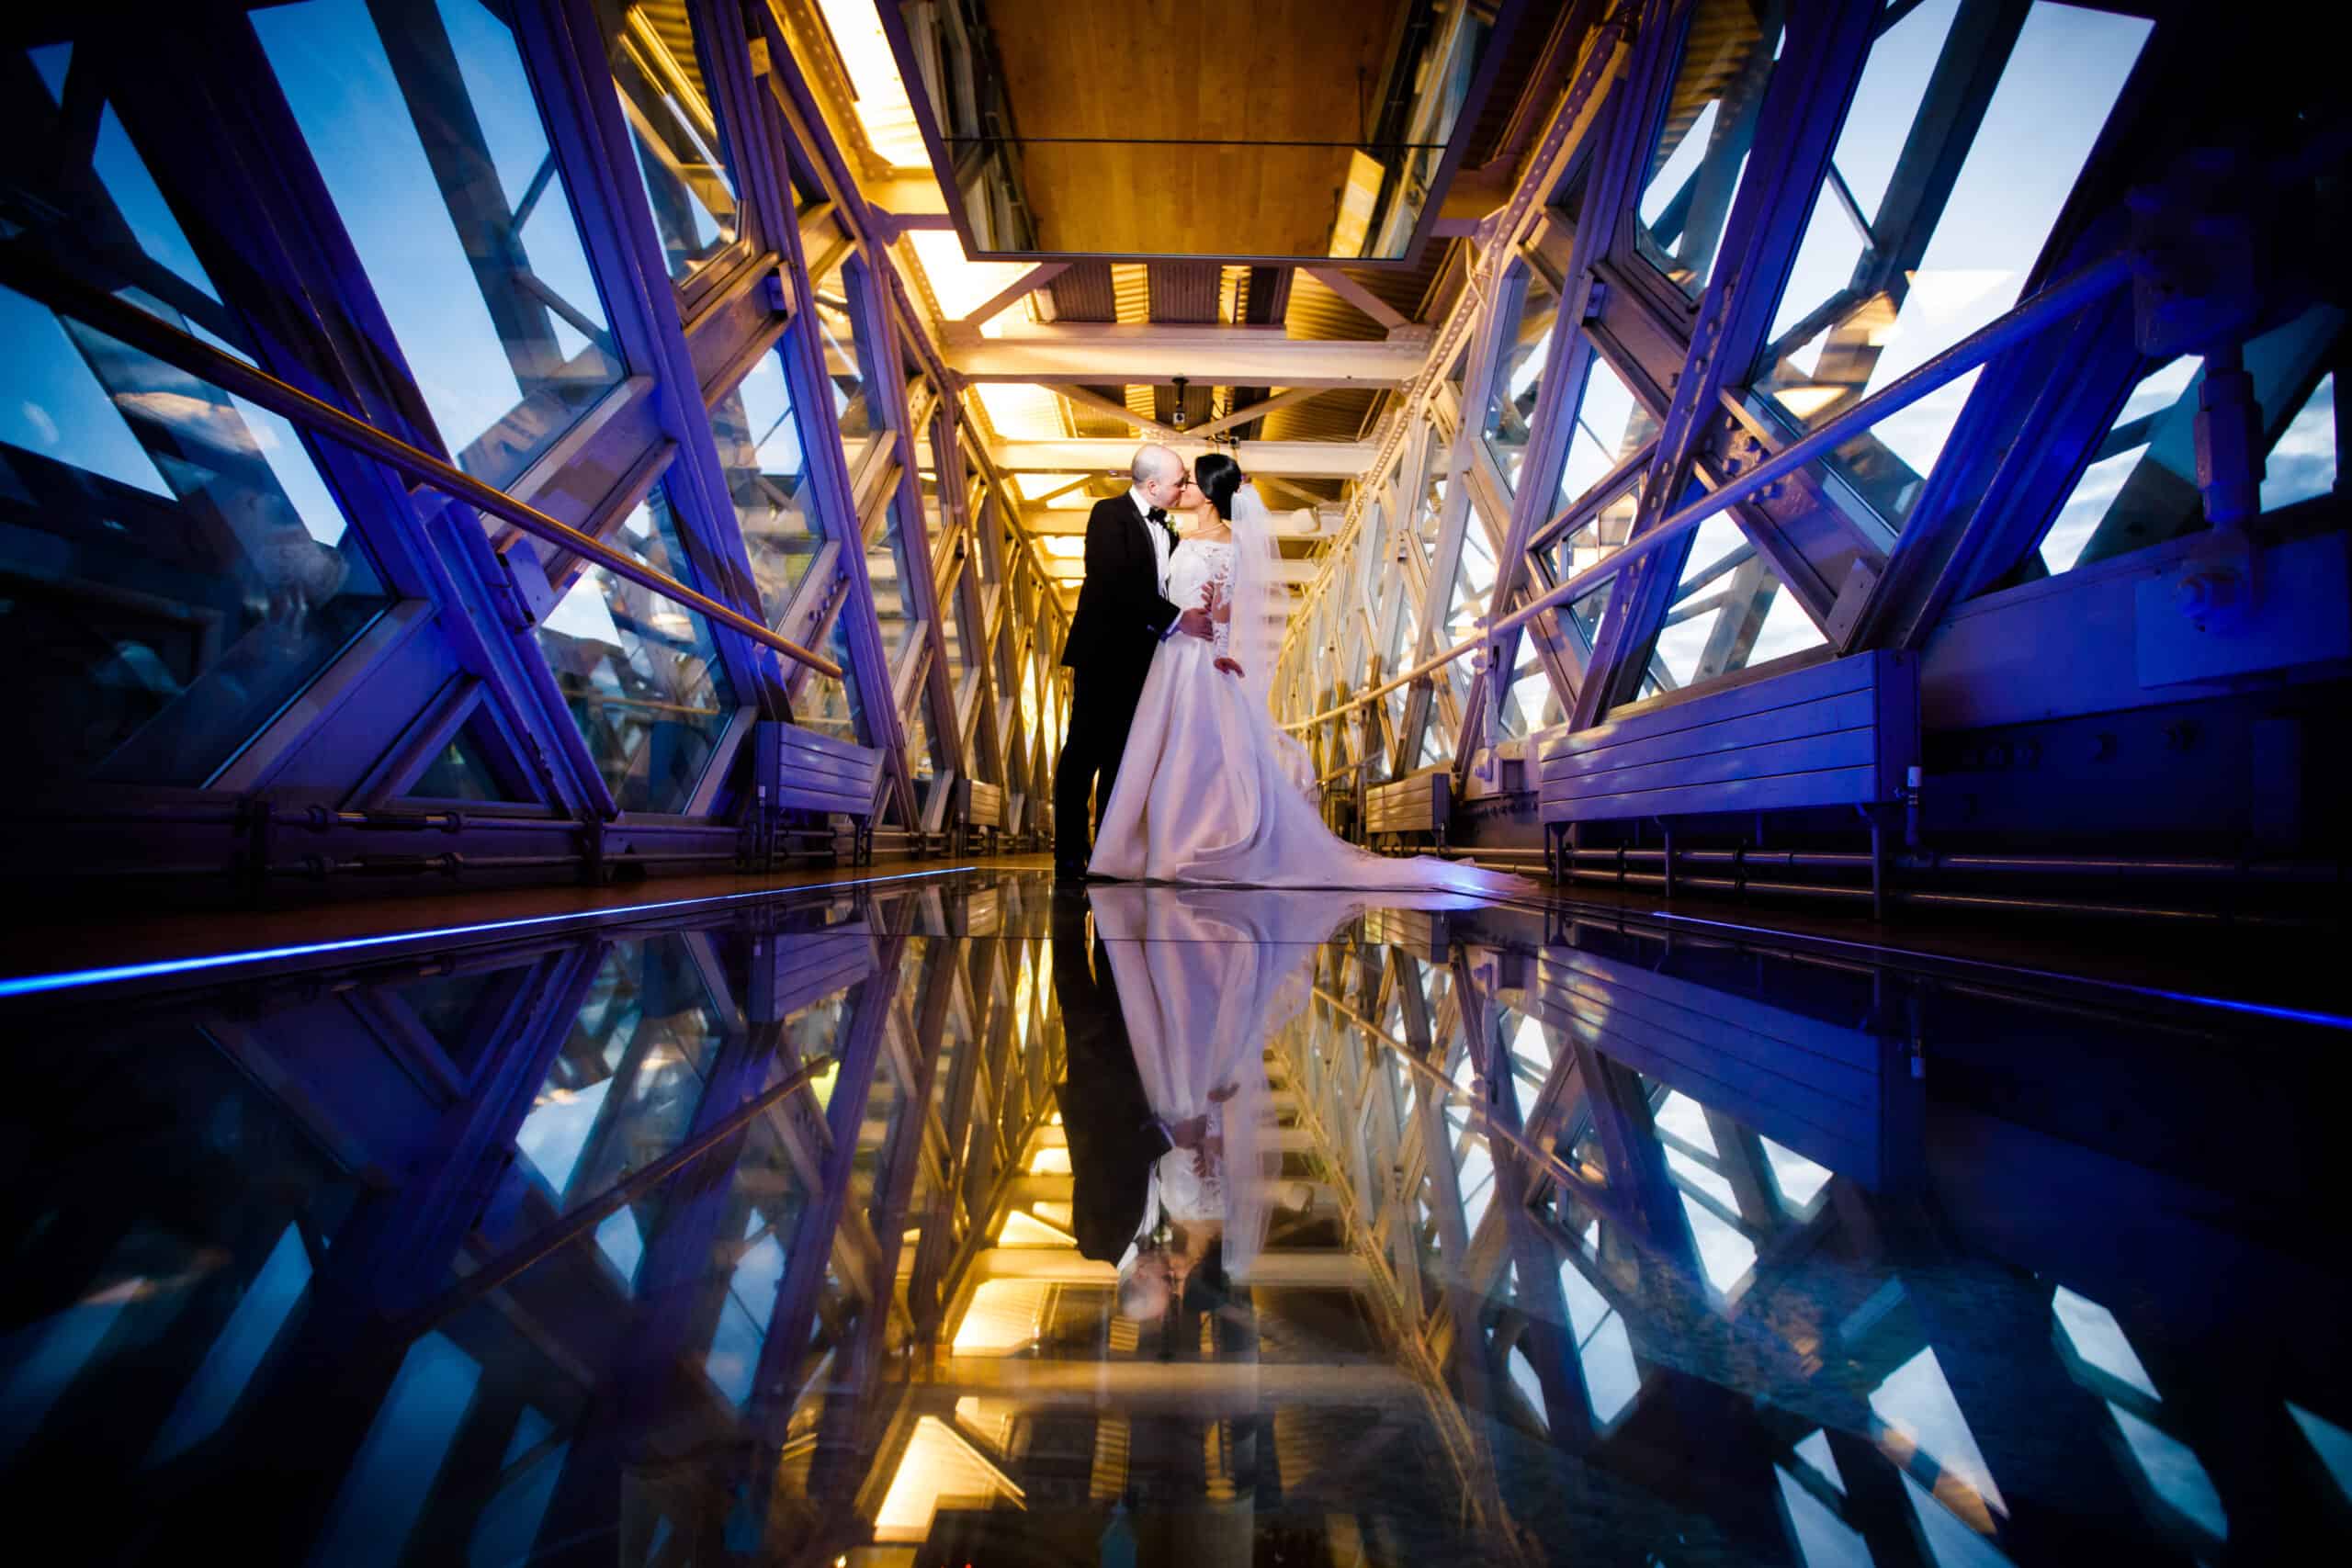 Couples can now get married on Tower Bridge